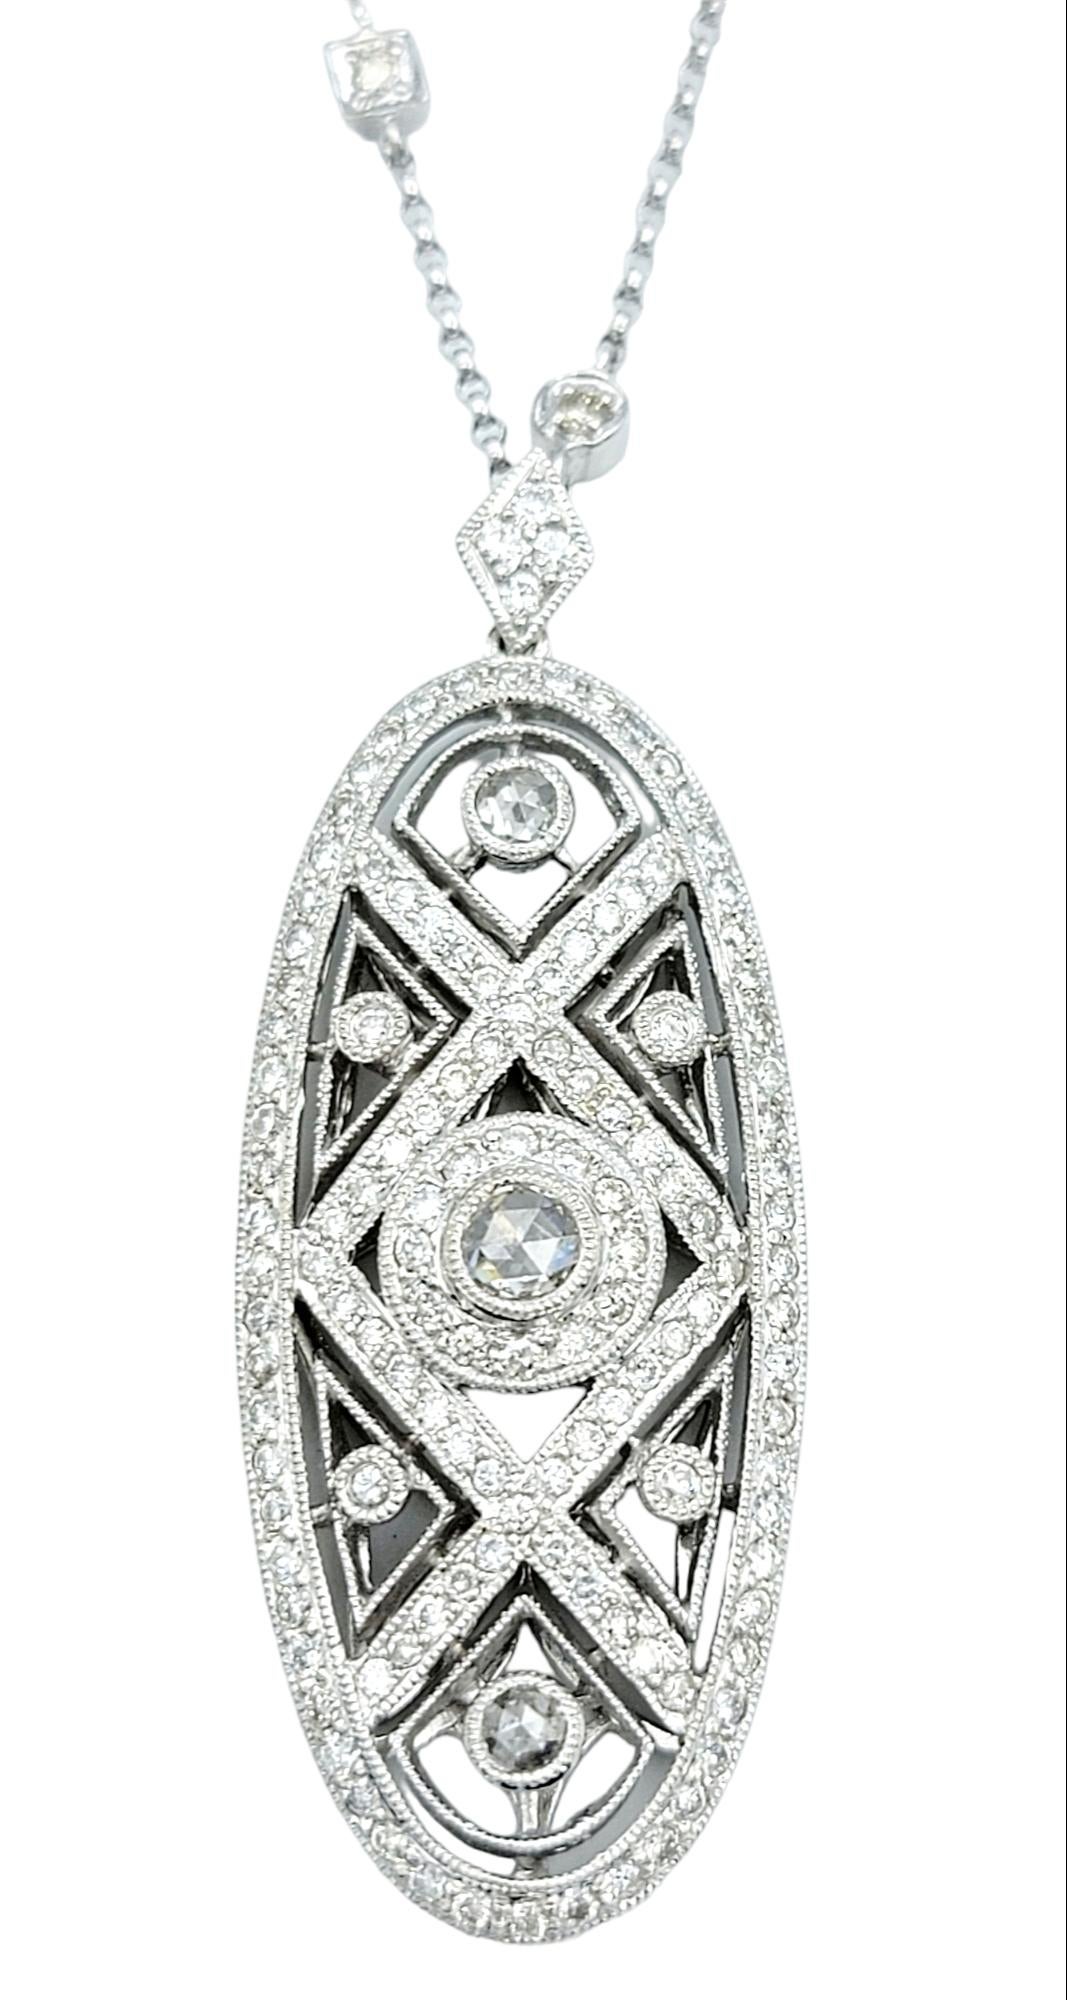 This exquisite pendant necklace is a striking example of elegance and craftsmanship. Crafted in 18 karat white gold, the elongated oval pendant features a meticulously designed cutout pattern adorned with delicate milgrain detailing, adding a